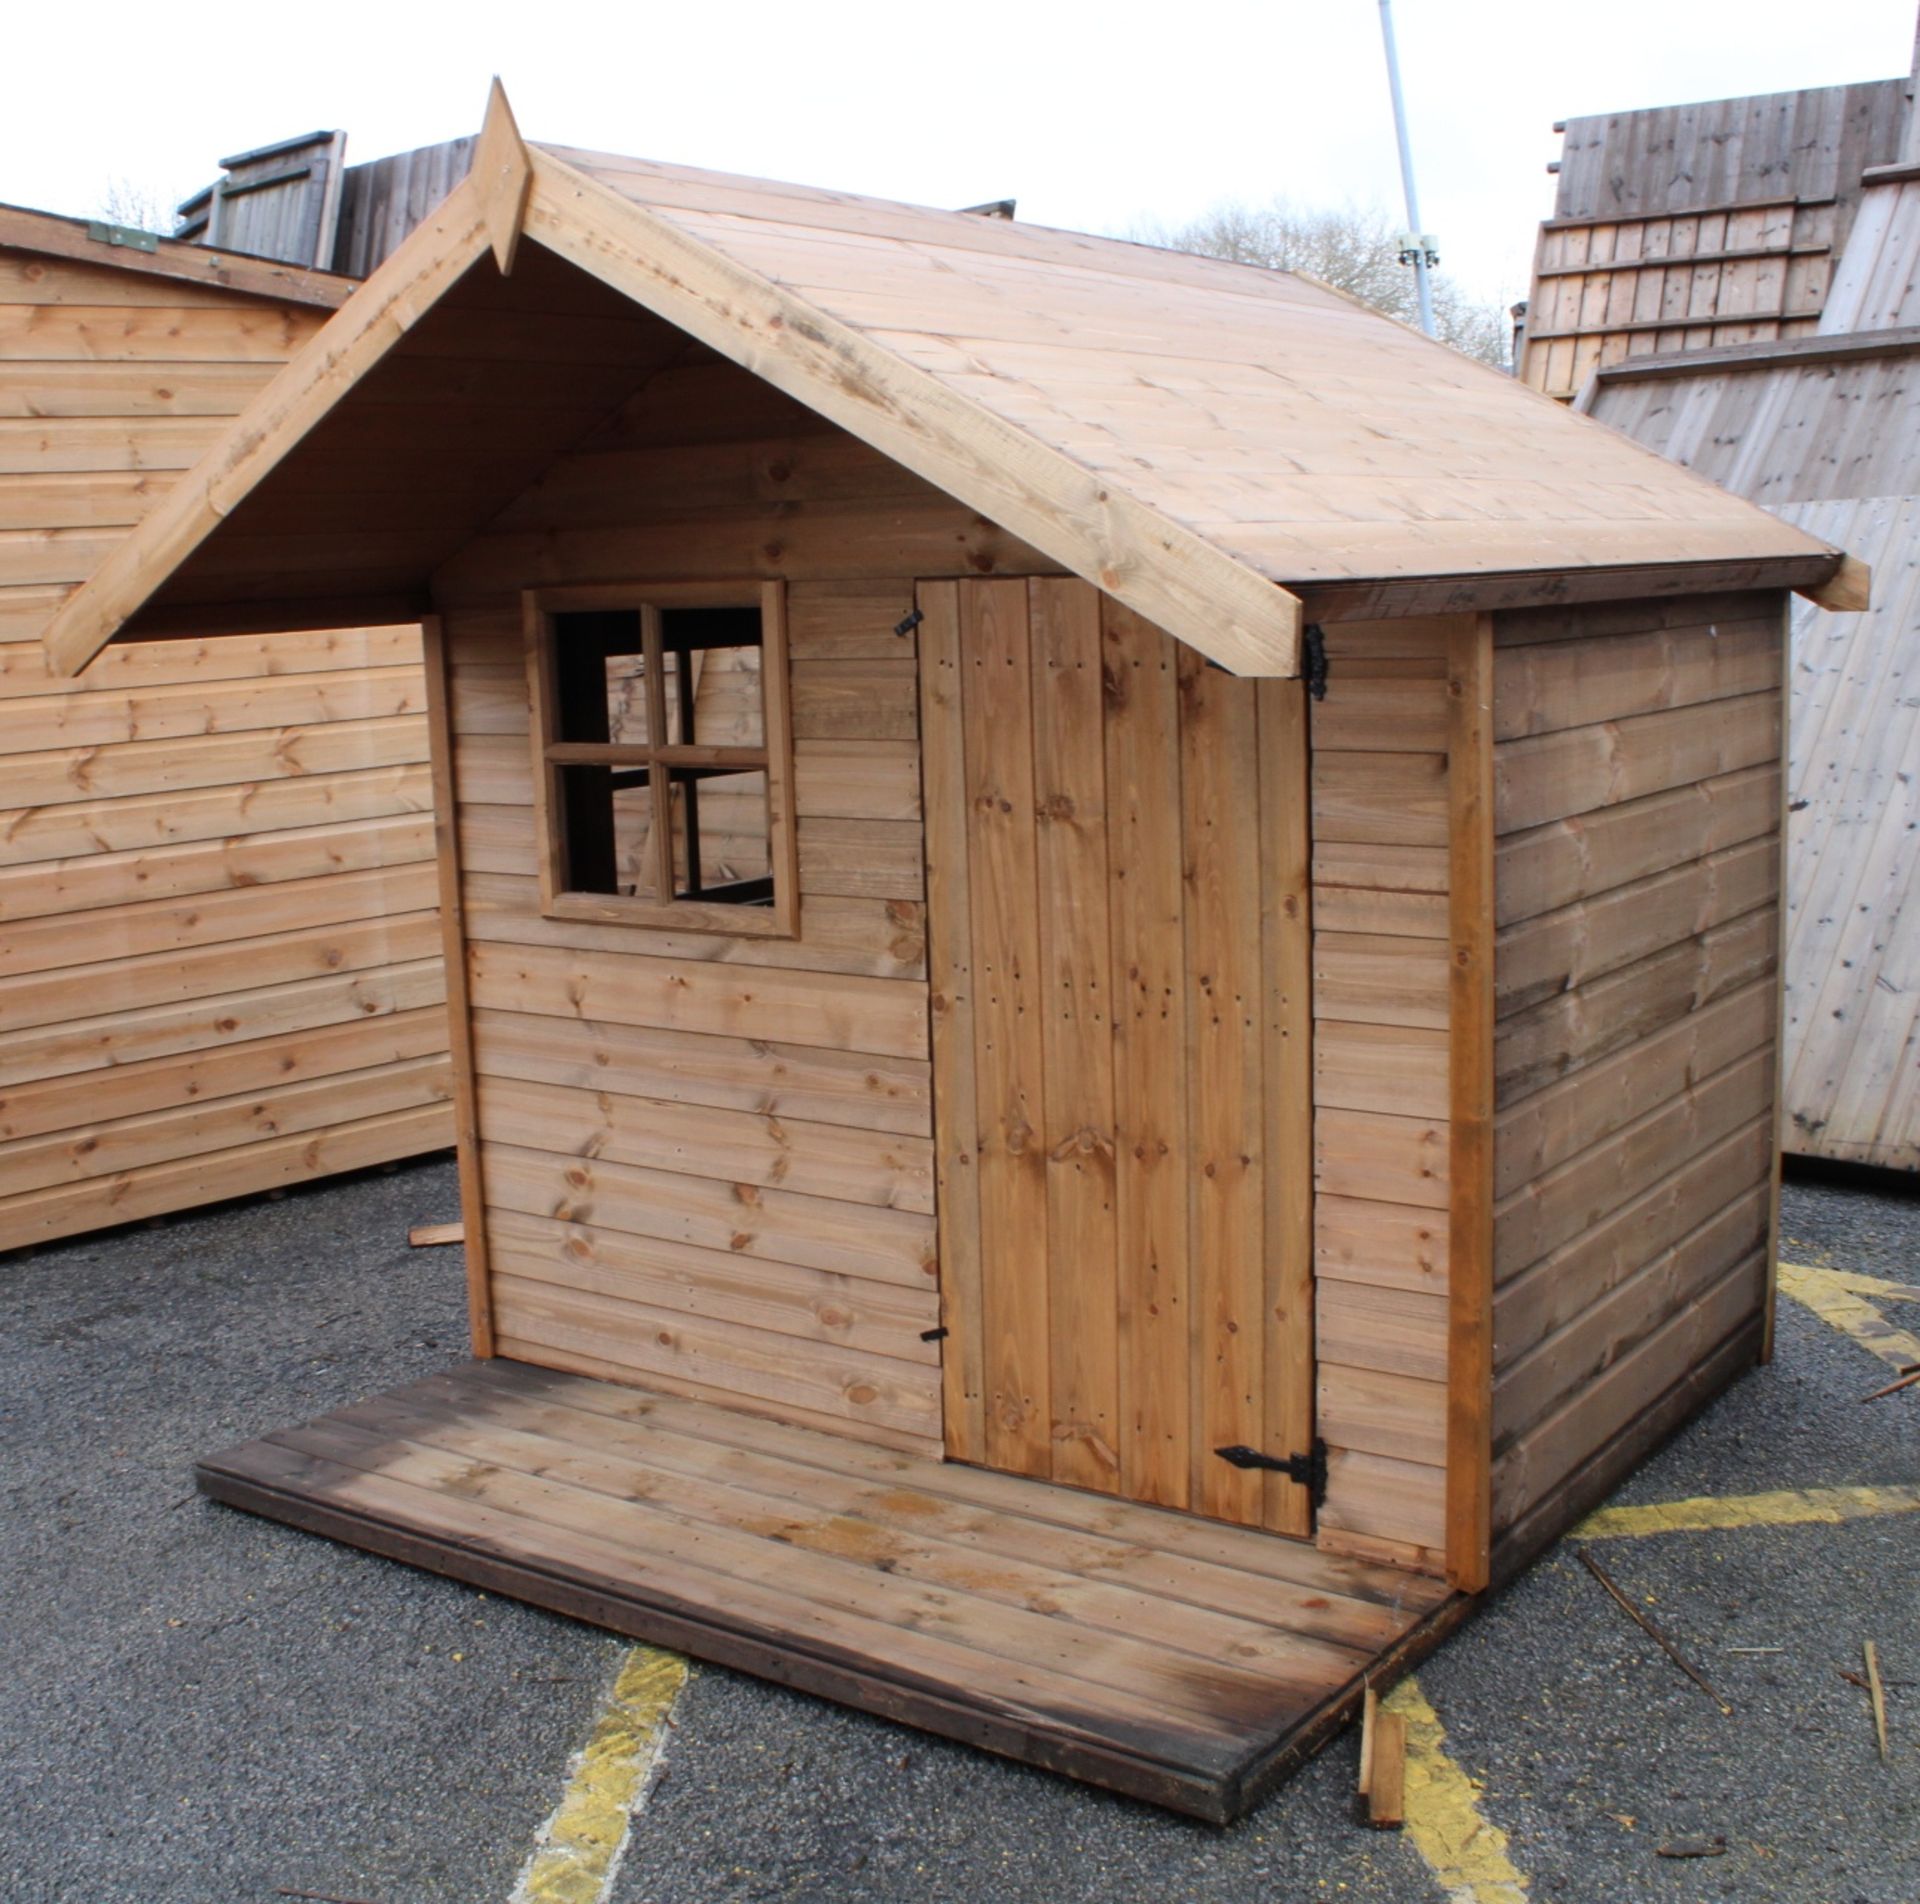 4x6 kids playhouse with overhang and veranda, Stnadrad 16mm Nominal Cladding - Image 3 of 4